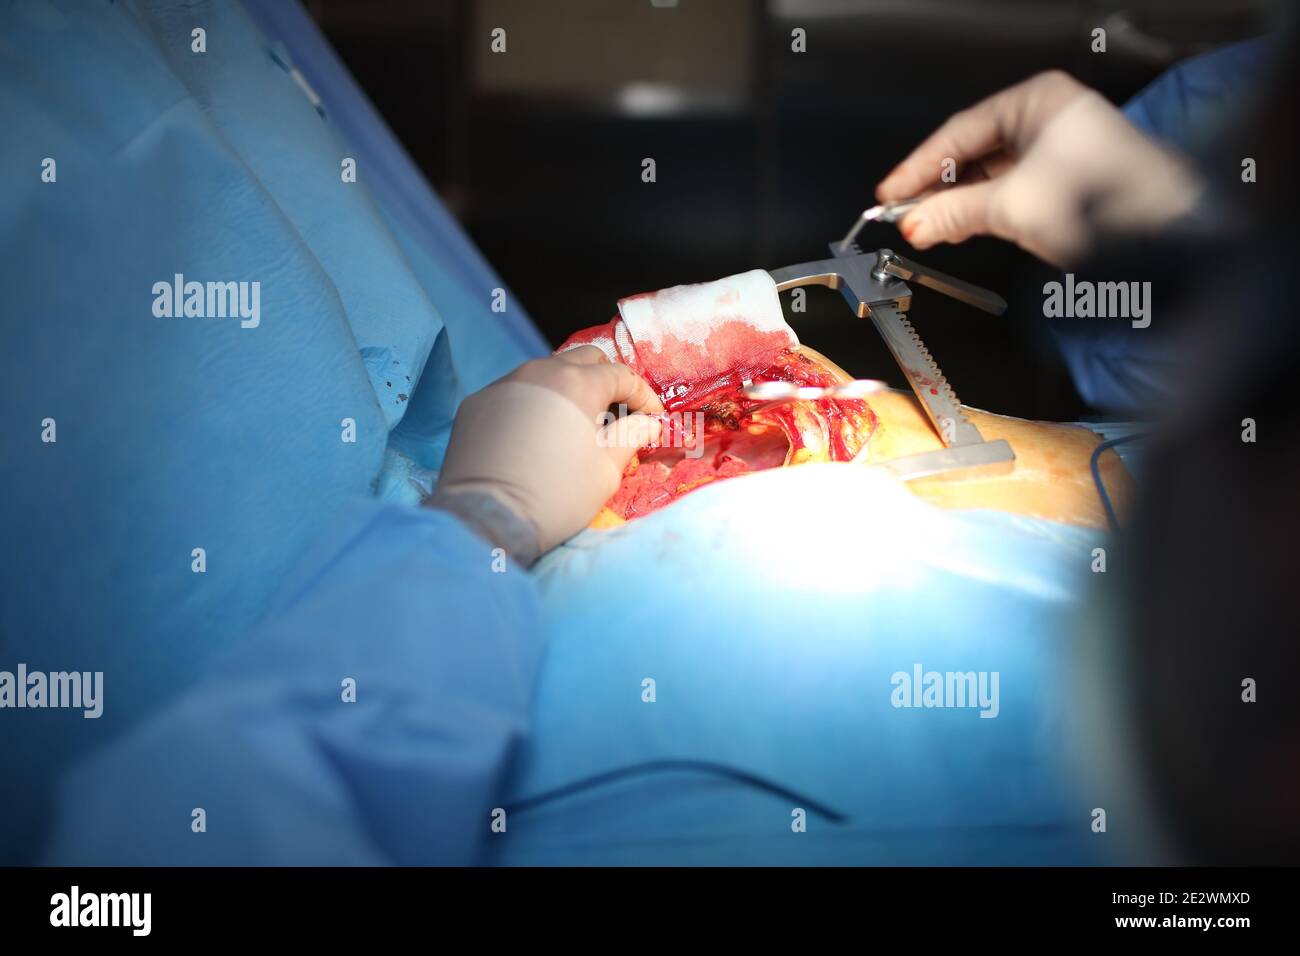 Starting surgical treatment, concept of surgeon job. Stock Photo